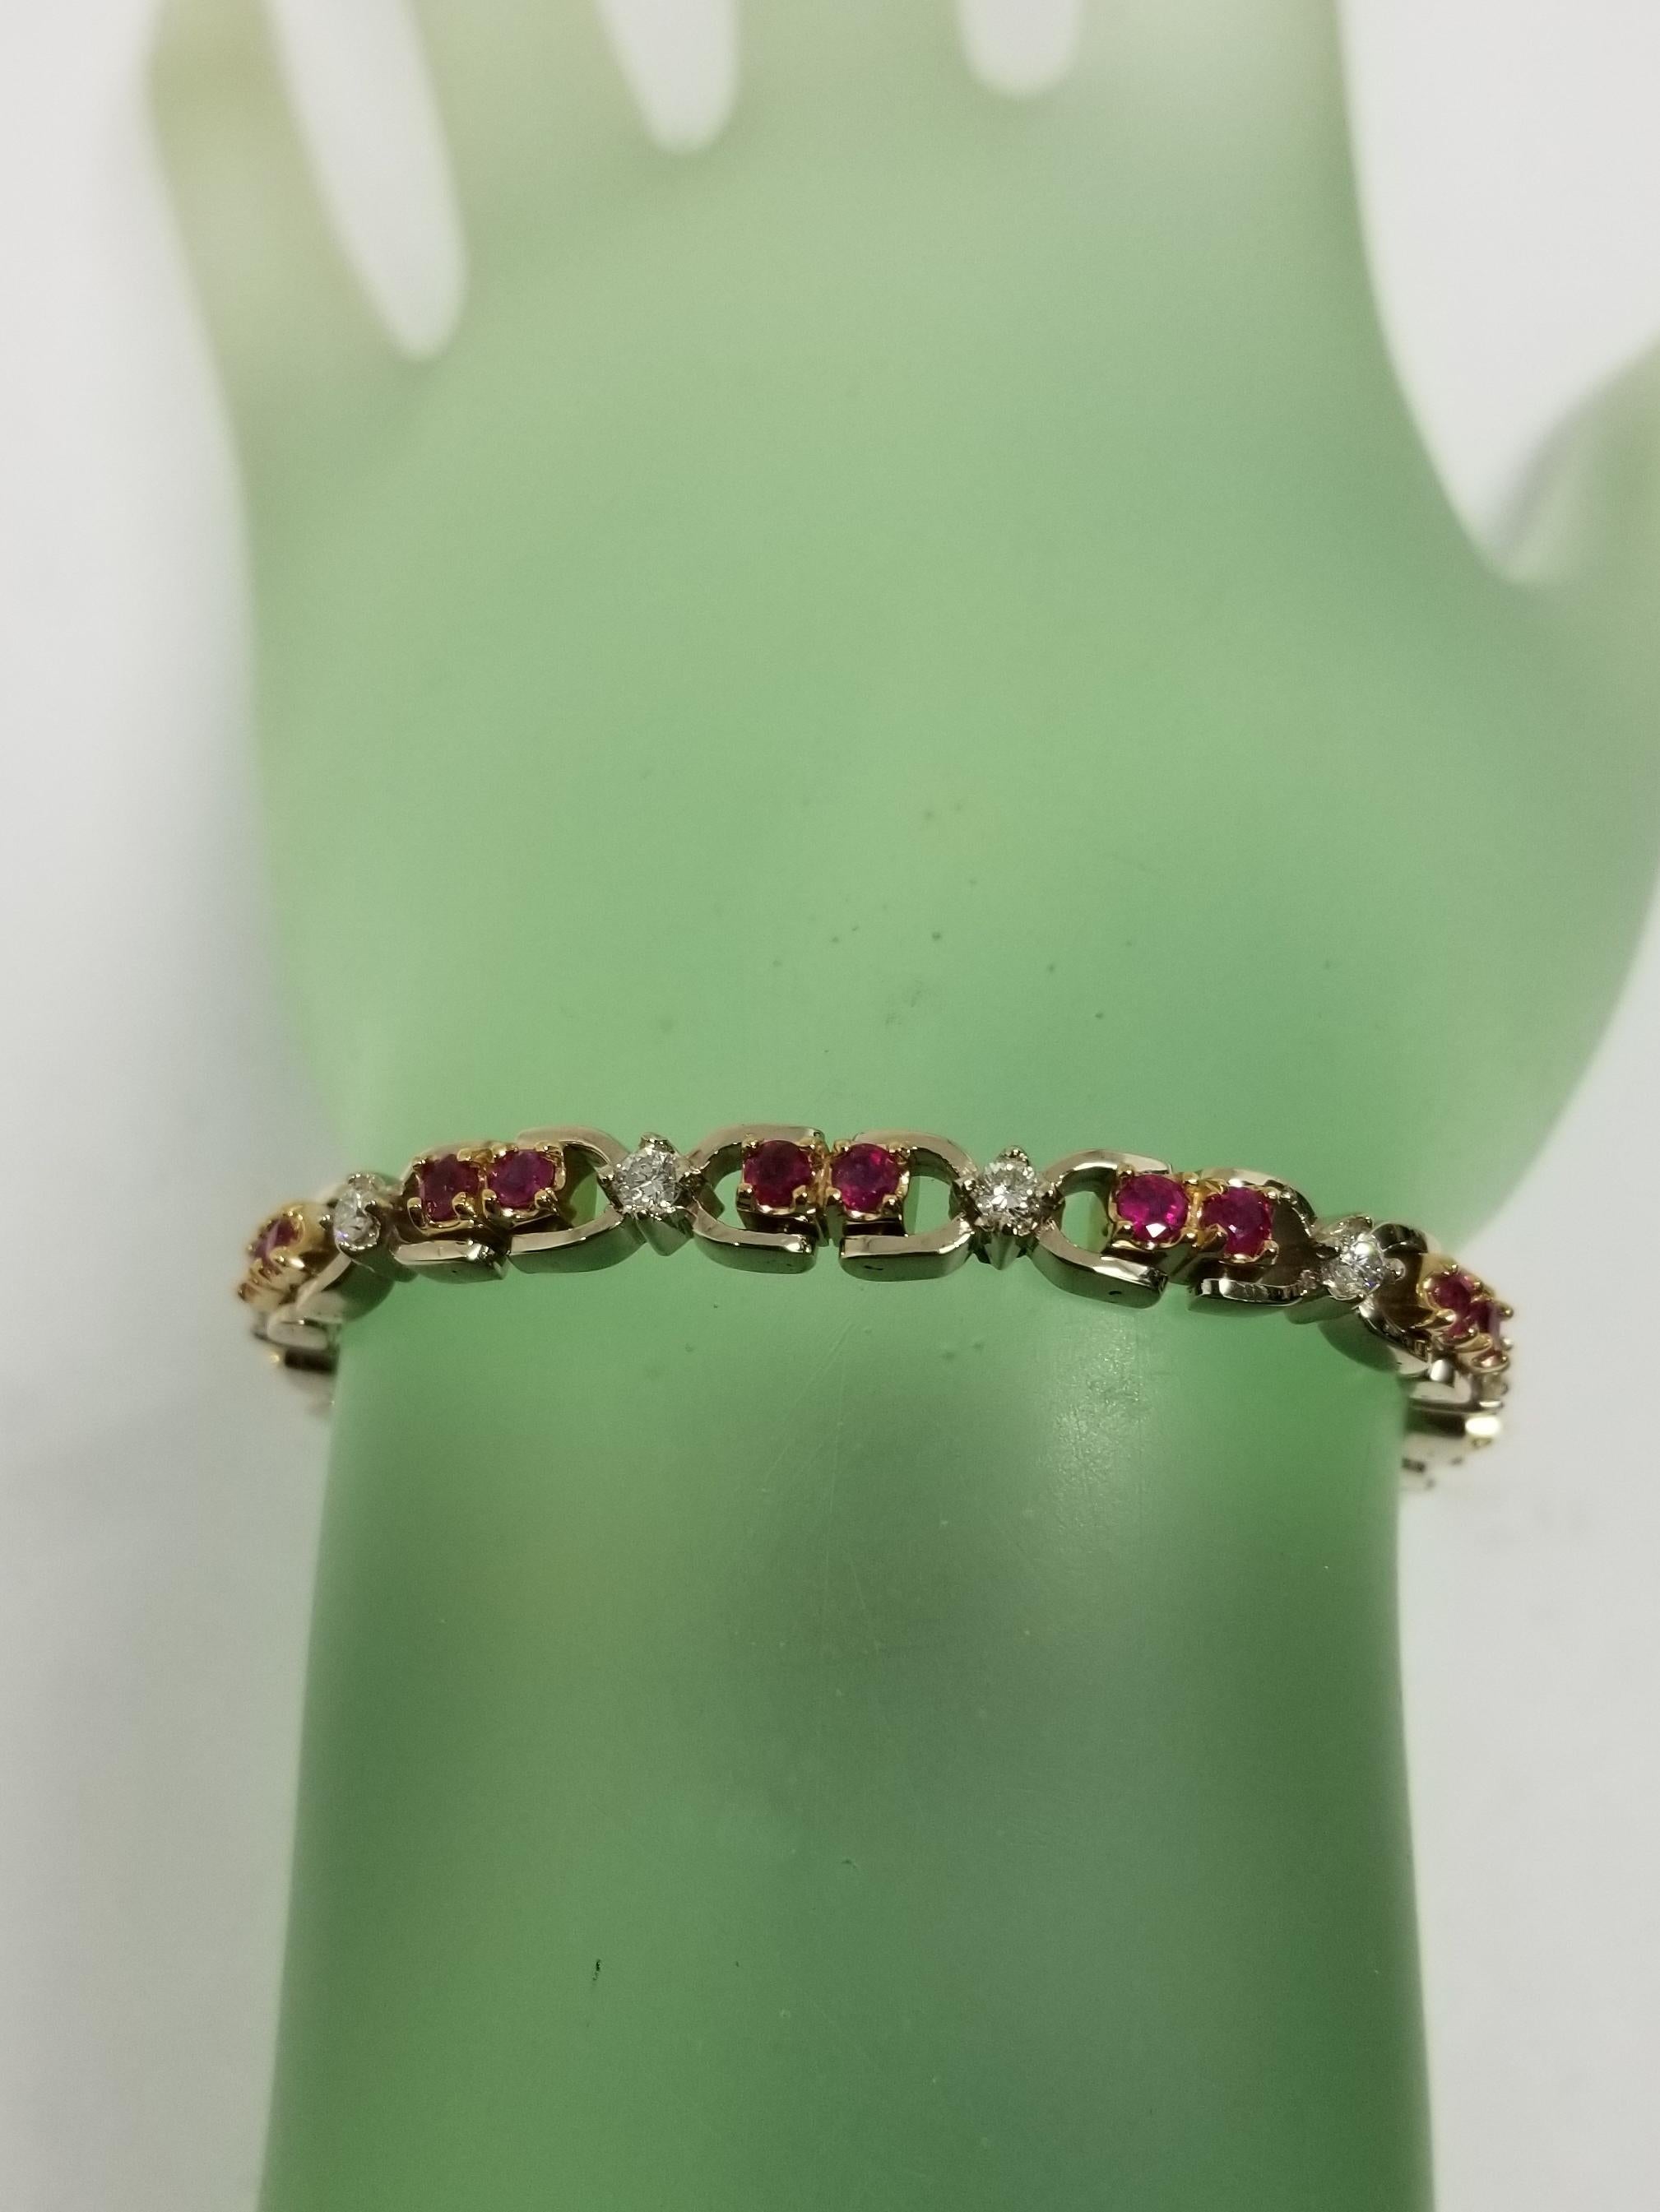 Contemporary 14k 2-Tone Gold Oval Ruby and Diamond Bracelet, Containing 25 Oval Rubies of Gem For Sale